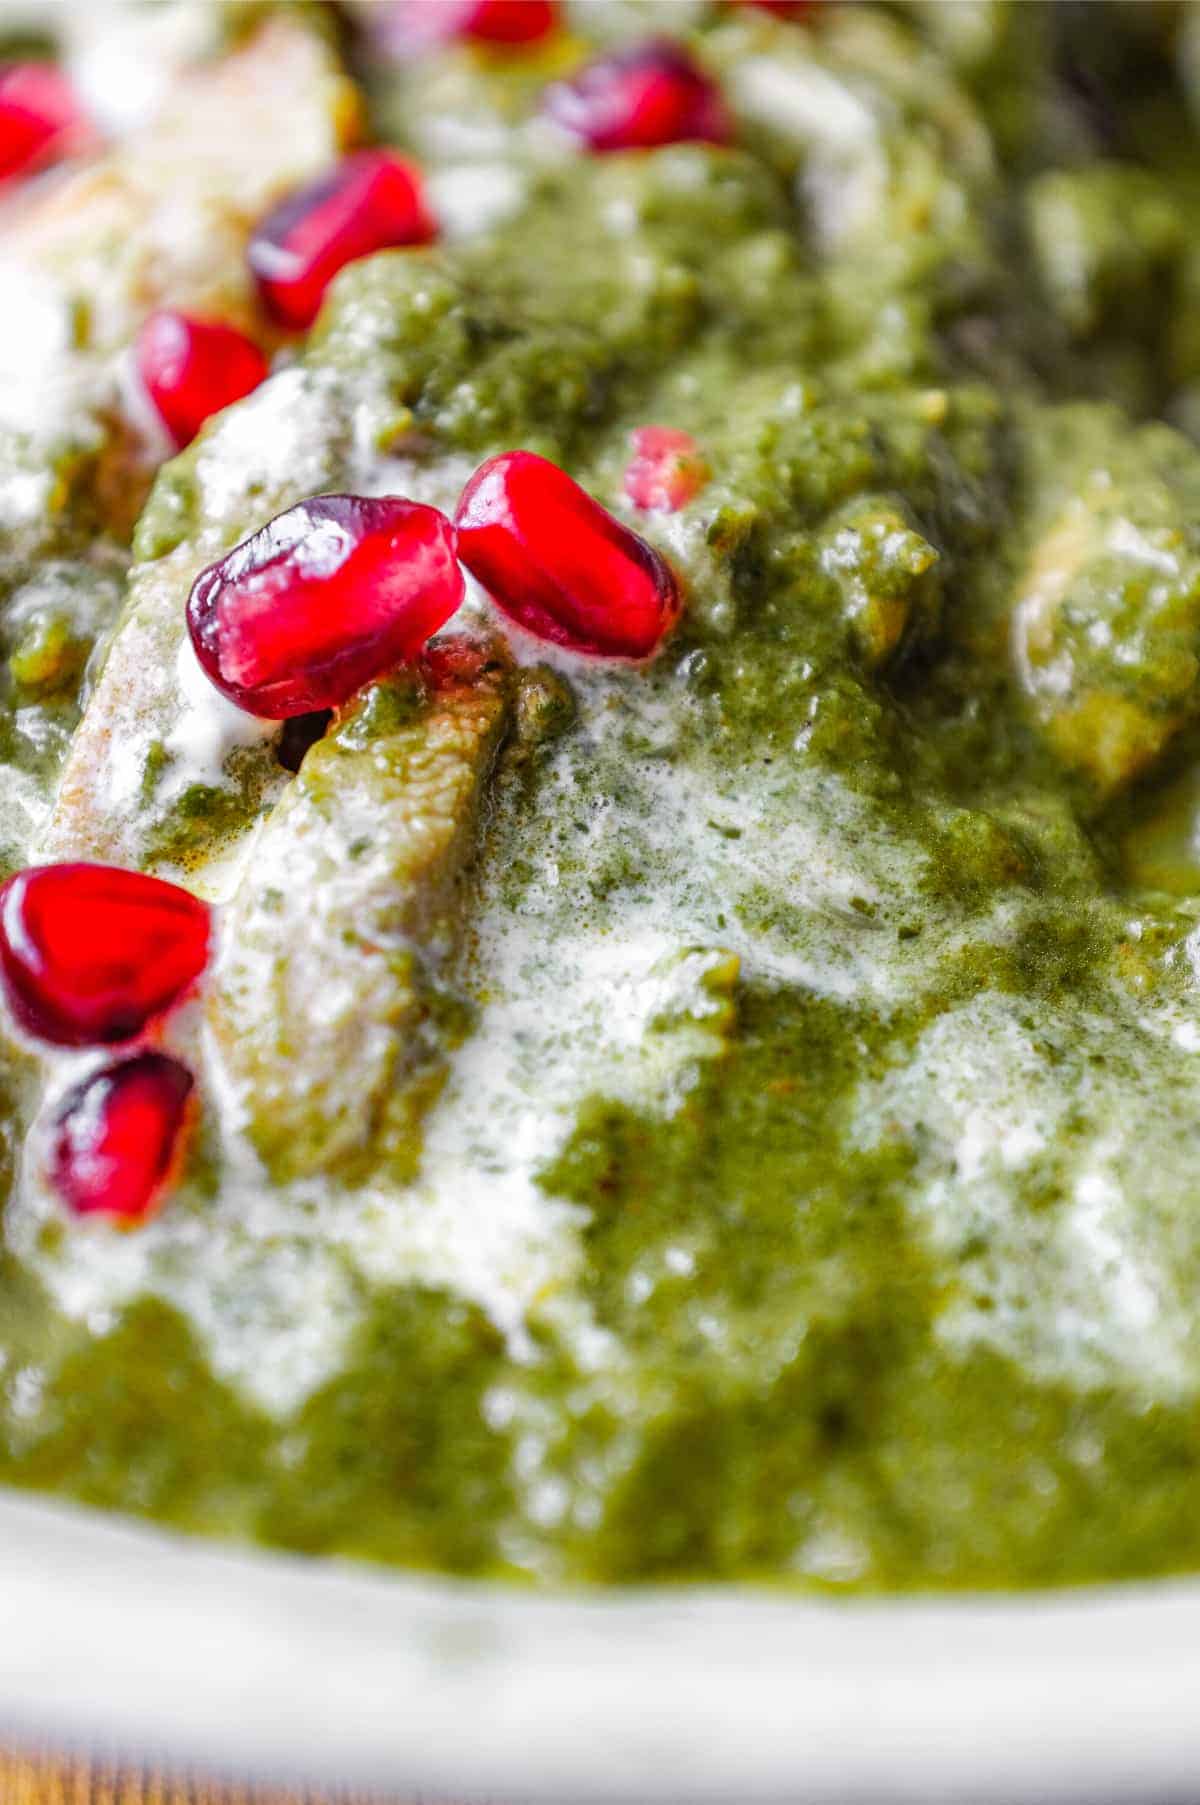 A bowl of Chicken Saag curry drizzled with fresh cream and sprinkled with pomegranate seeds.